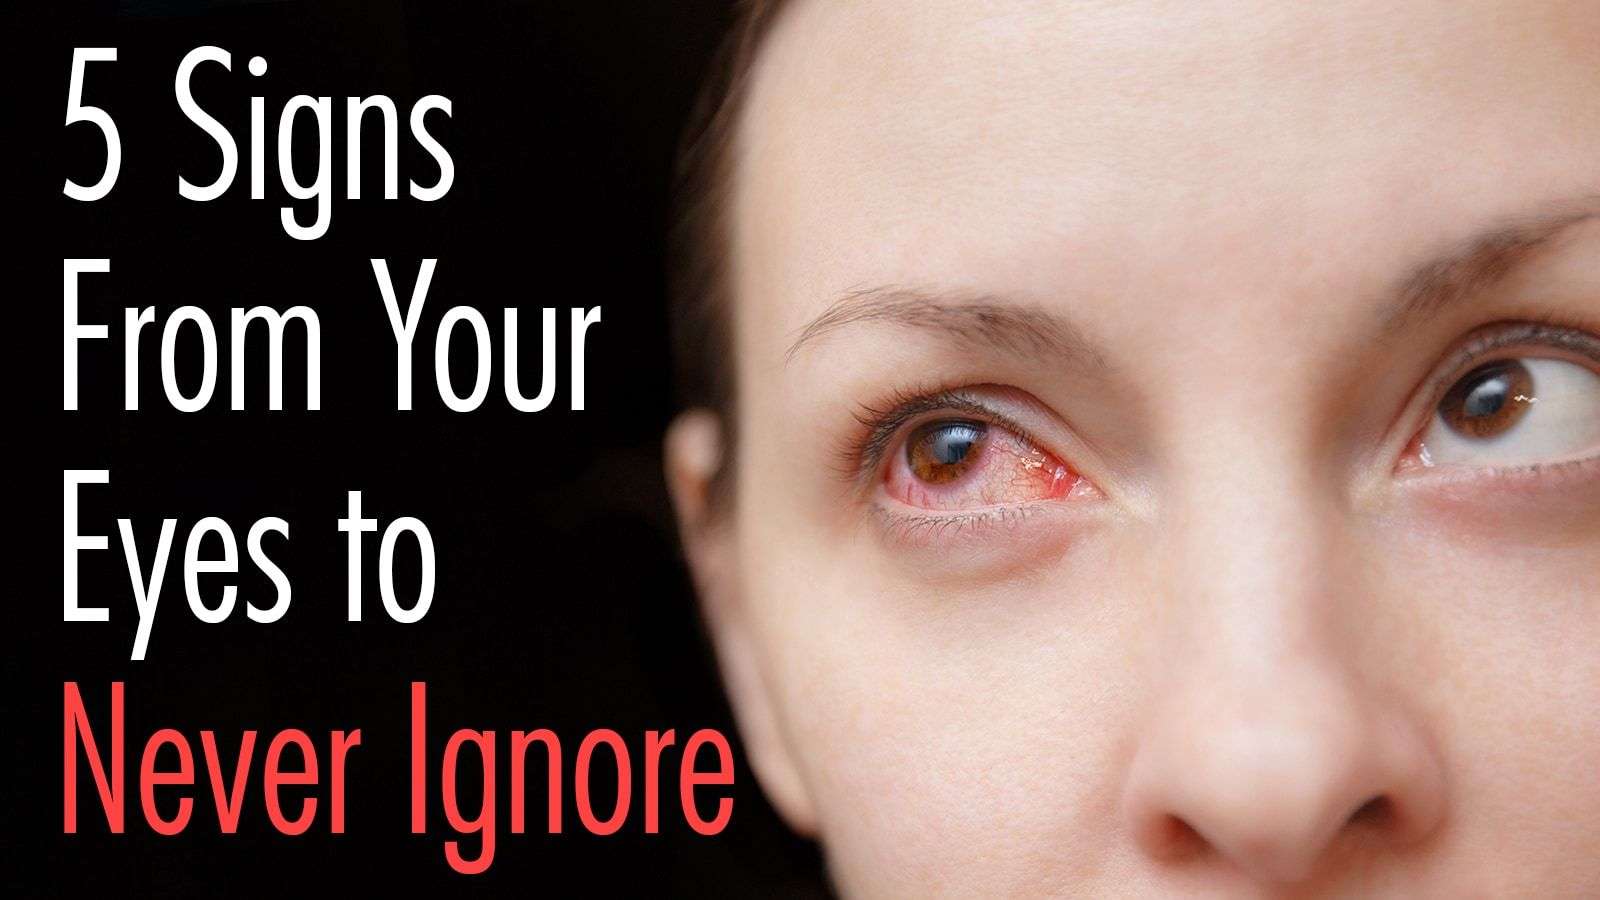 5 Signs From Your Eyes to Never Ignore